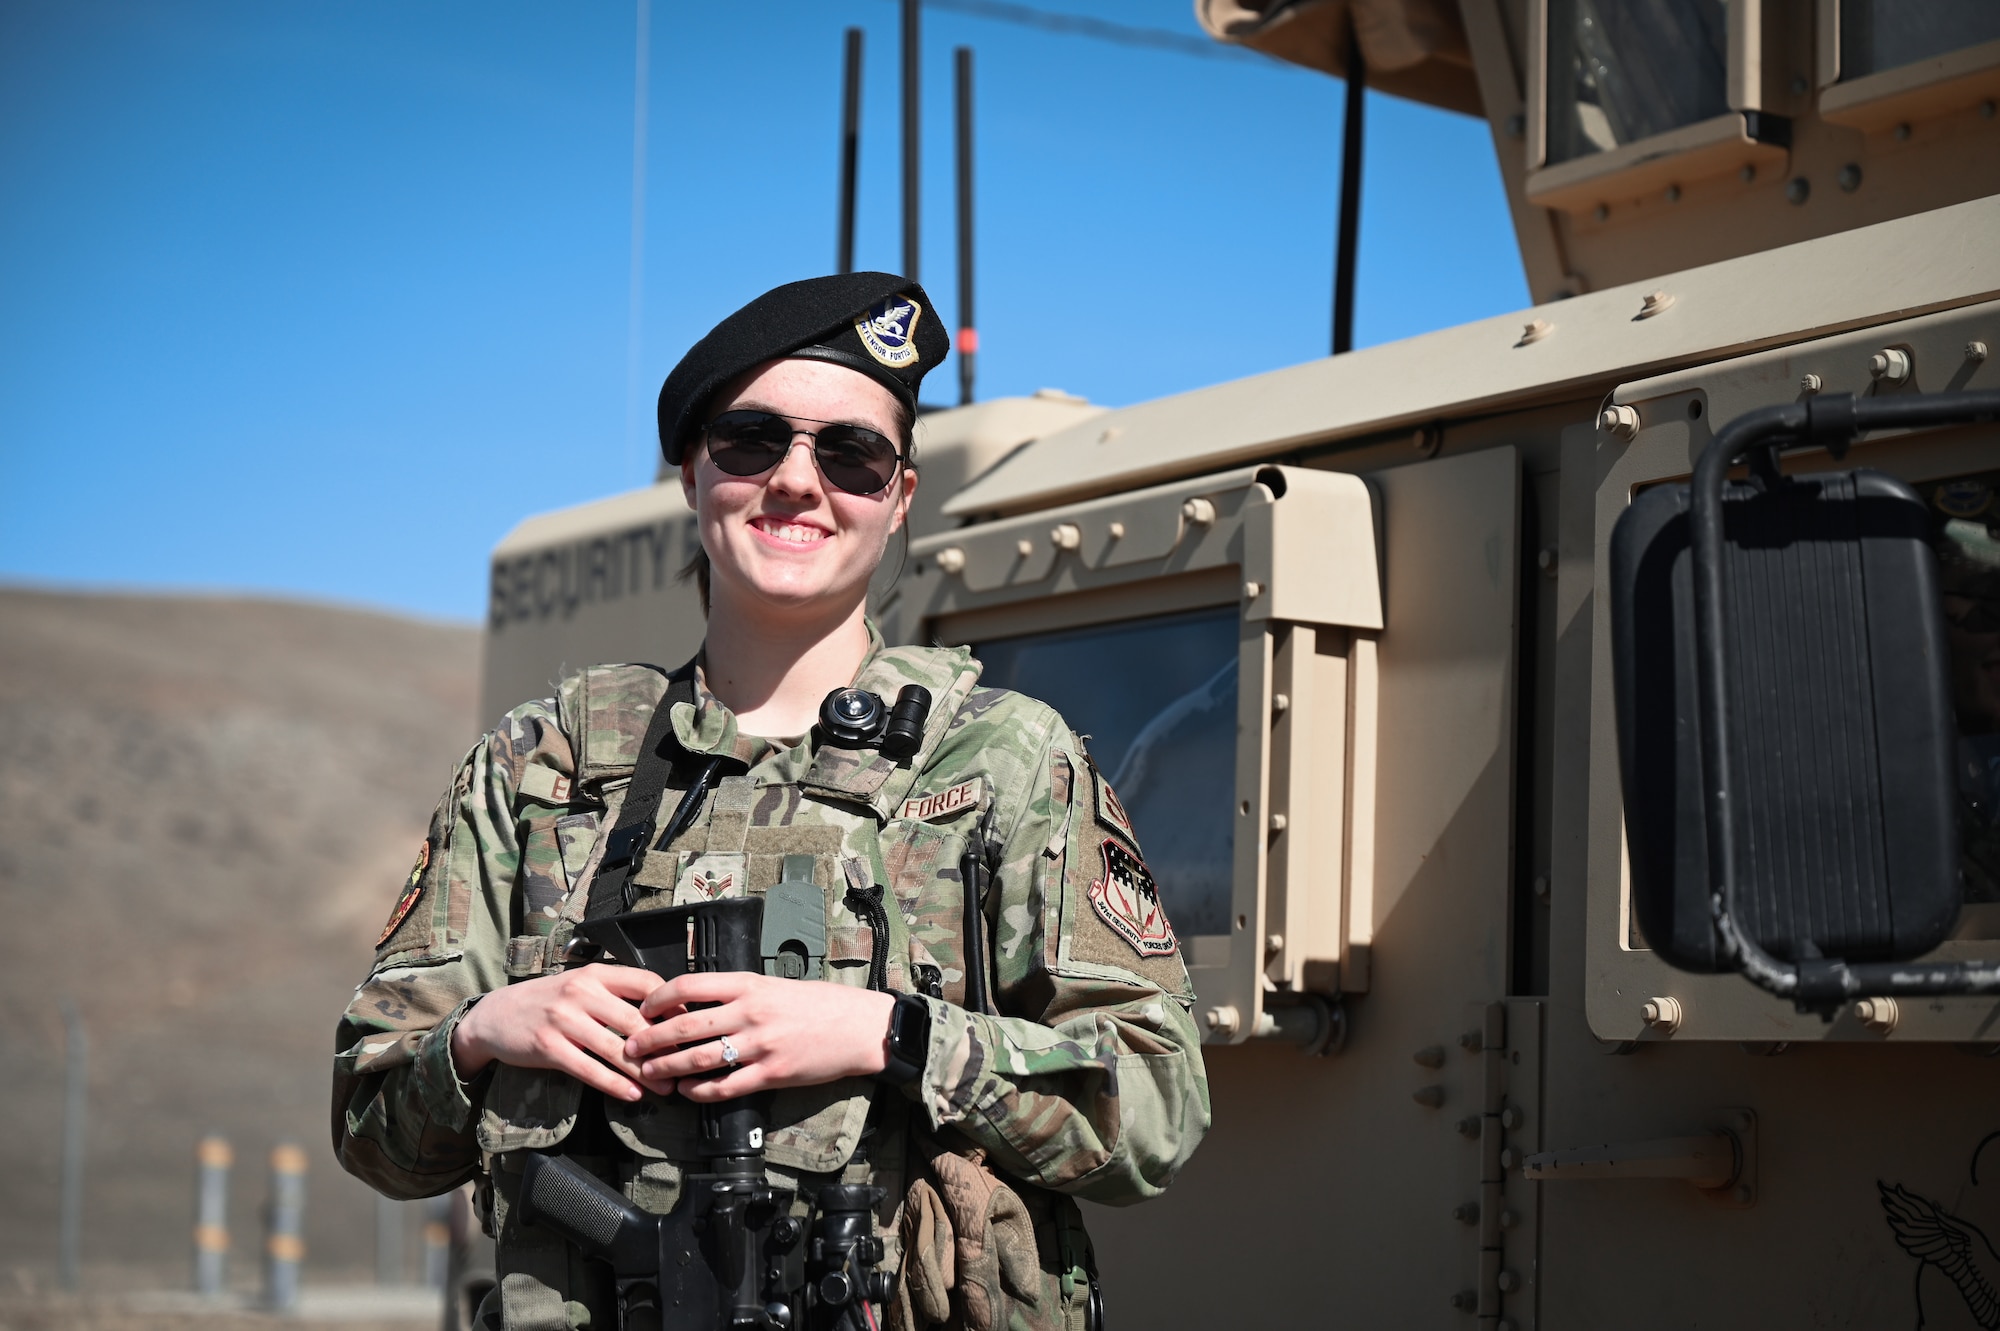 A smiling woman in military uniform stands beside a military armored vehicle.